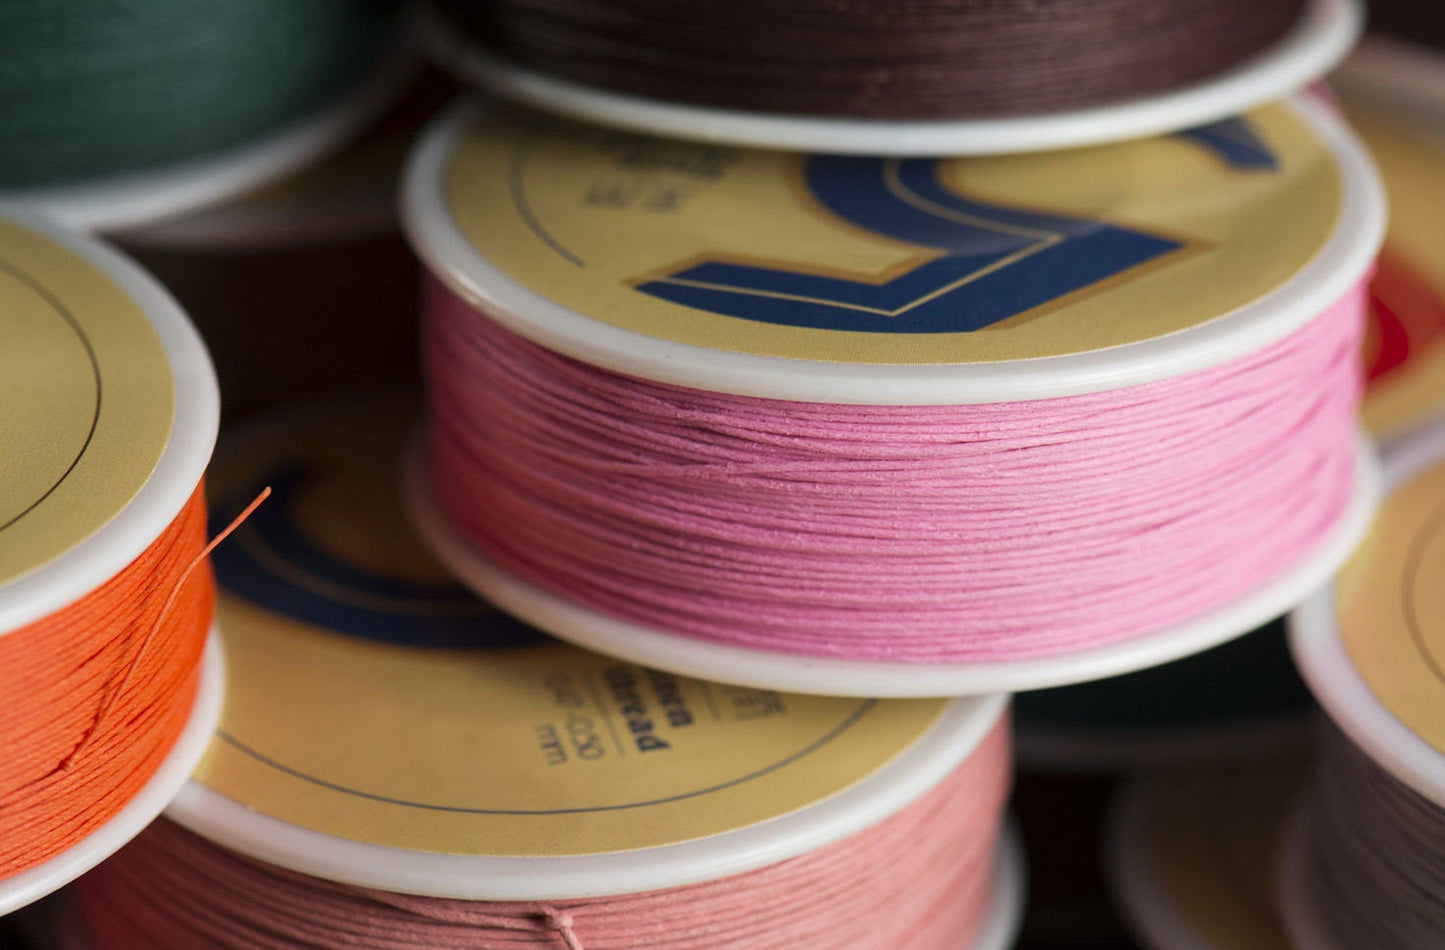 Famous ZJ#8 0.32-0.40mm Linen Waxed Threads For Handmade Letherwork, Thread For Leather, Sewing Thread ThreadsZJ